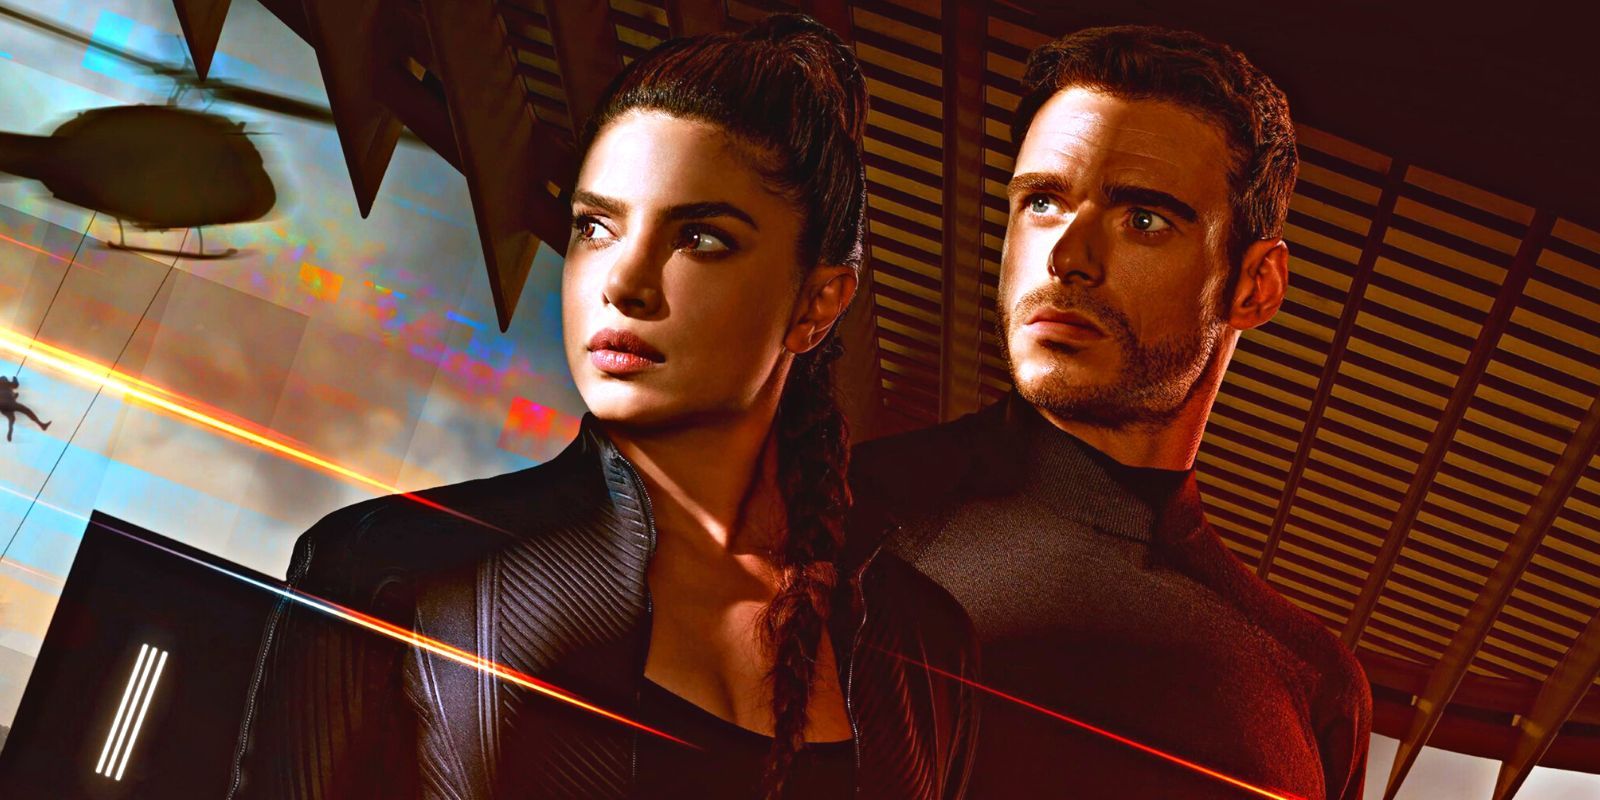 Priyanka Chopra and Richard Madden looking stoic in front of a helicopter in Citadel